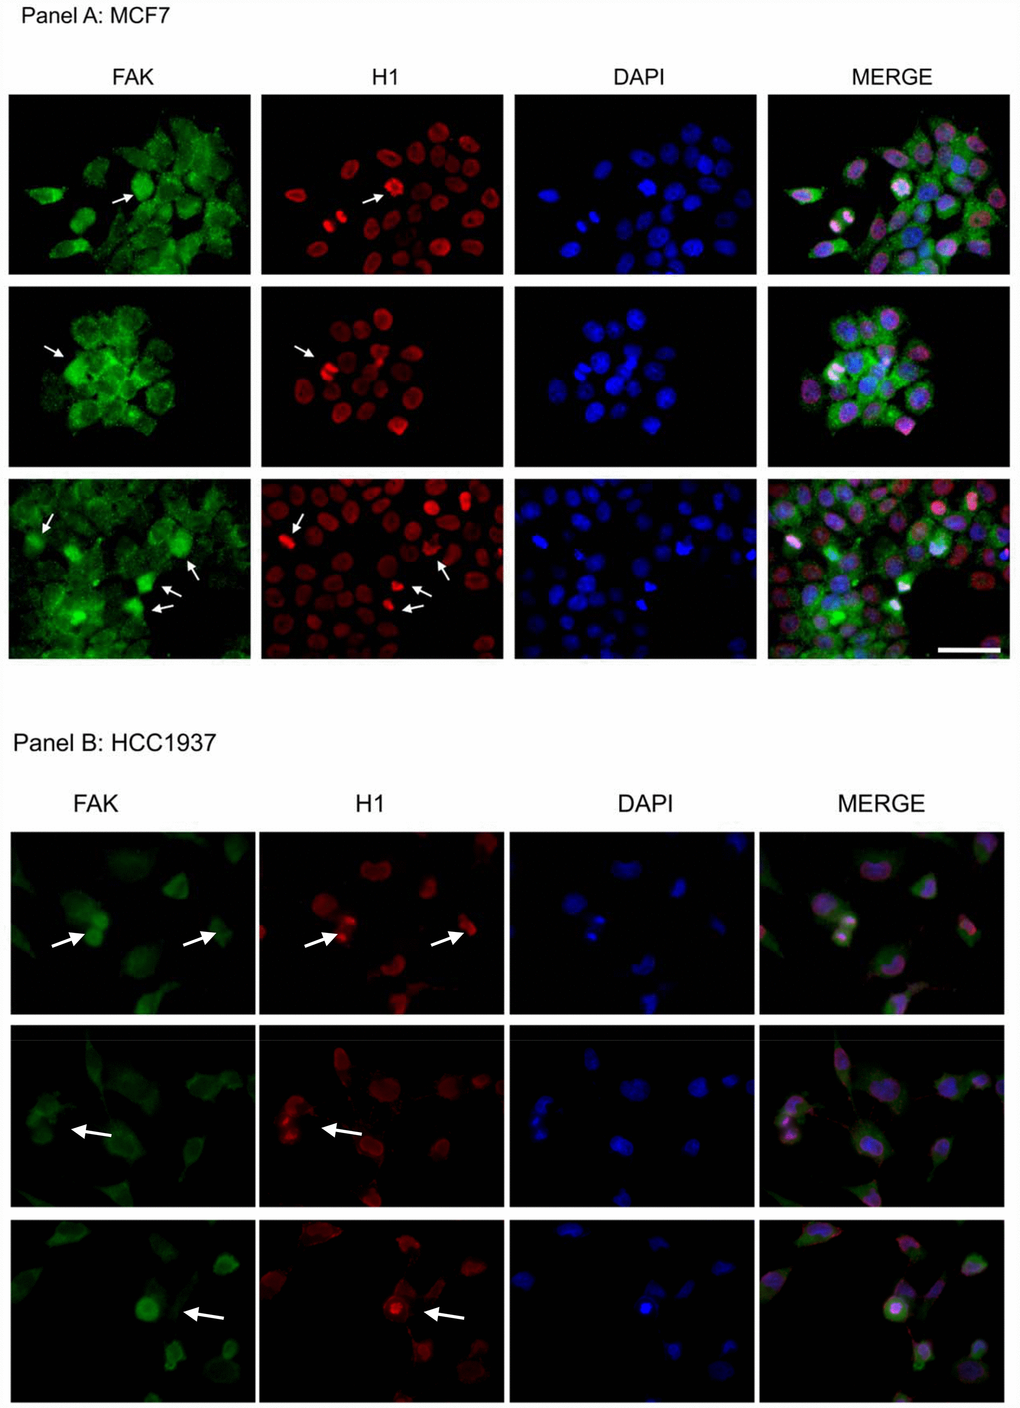 Assessment of FAK and H1 localization in MCF7 and HCC1937 cell lines. Immunofluorescence analysis of an asynchronous MCF7 cell population stained with antibodies against FAK (green) and H1 (red). Images of the cells captured at different stages of mitosis revealed FAK co-localization with H1 (white arrows). The nuclei were counterstained with DAPI (blue) and merge is also shown. Scale bar: 50 μm. The images are representative of three independent biological replicates.